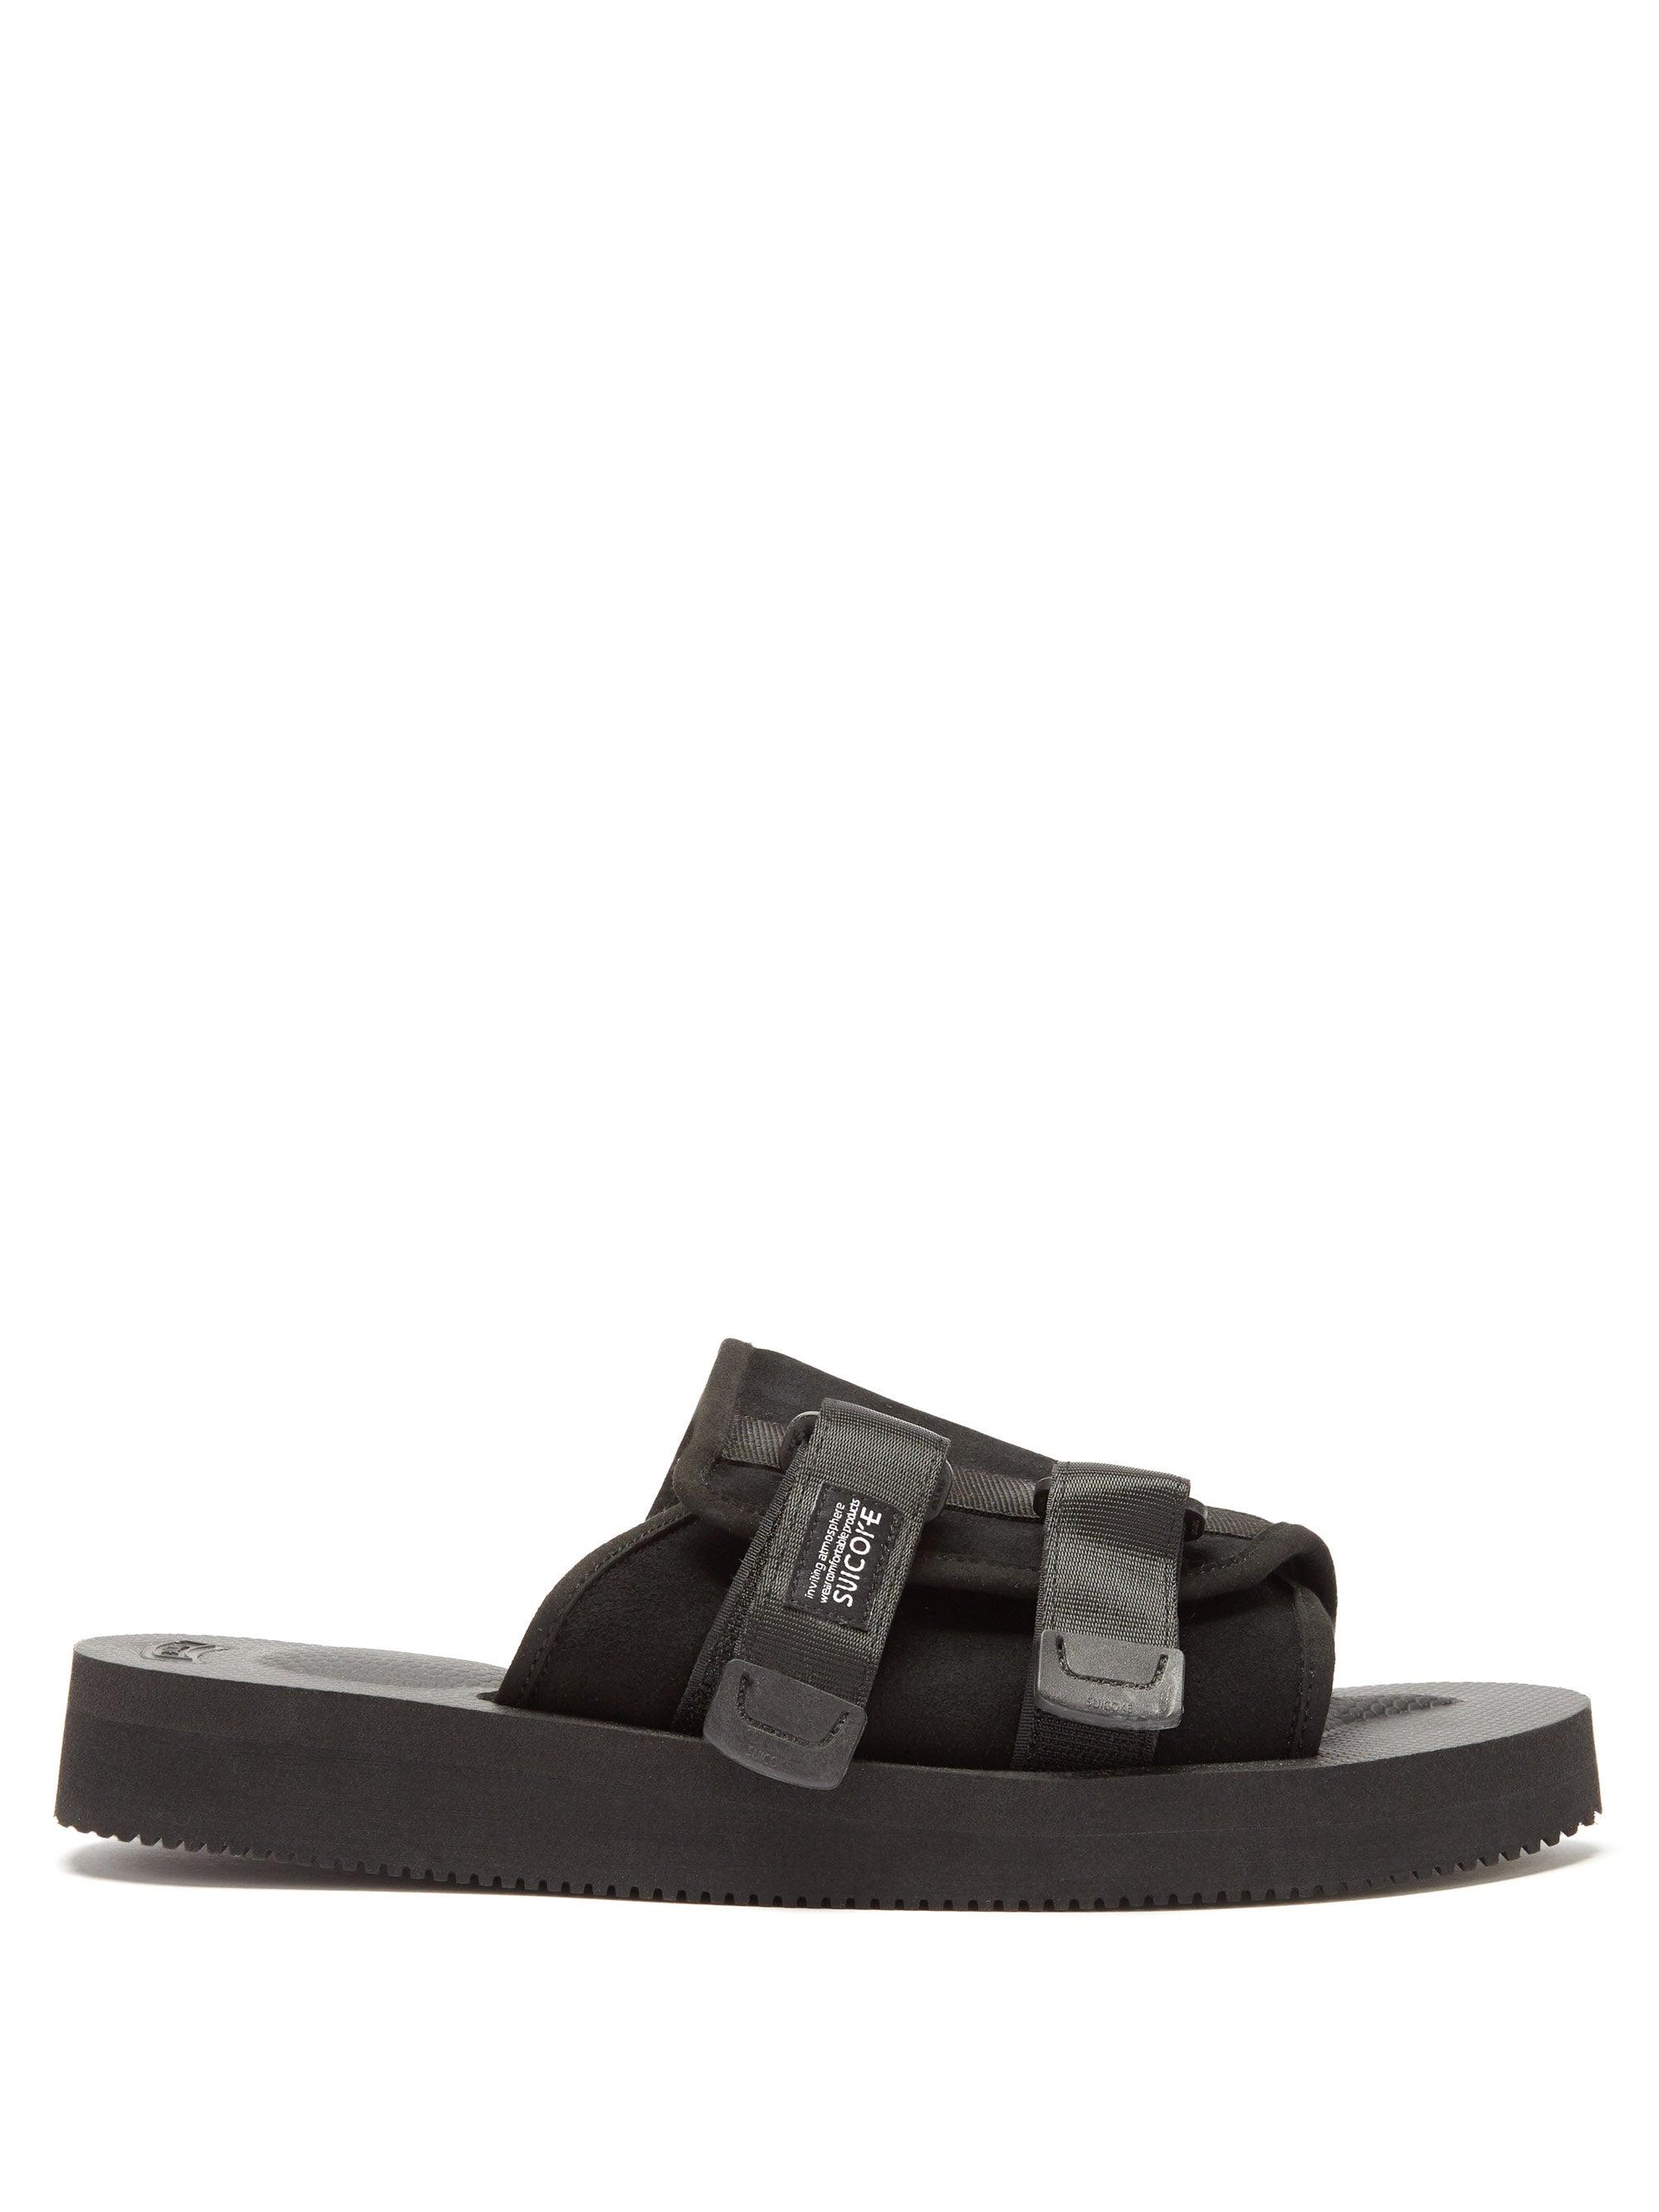 Suicoke Kaw-vs Suede And Leather Sandals in Black for Men - Lyst